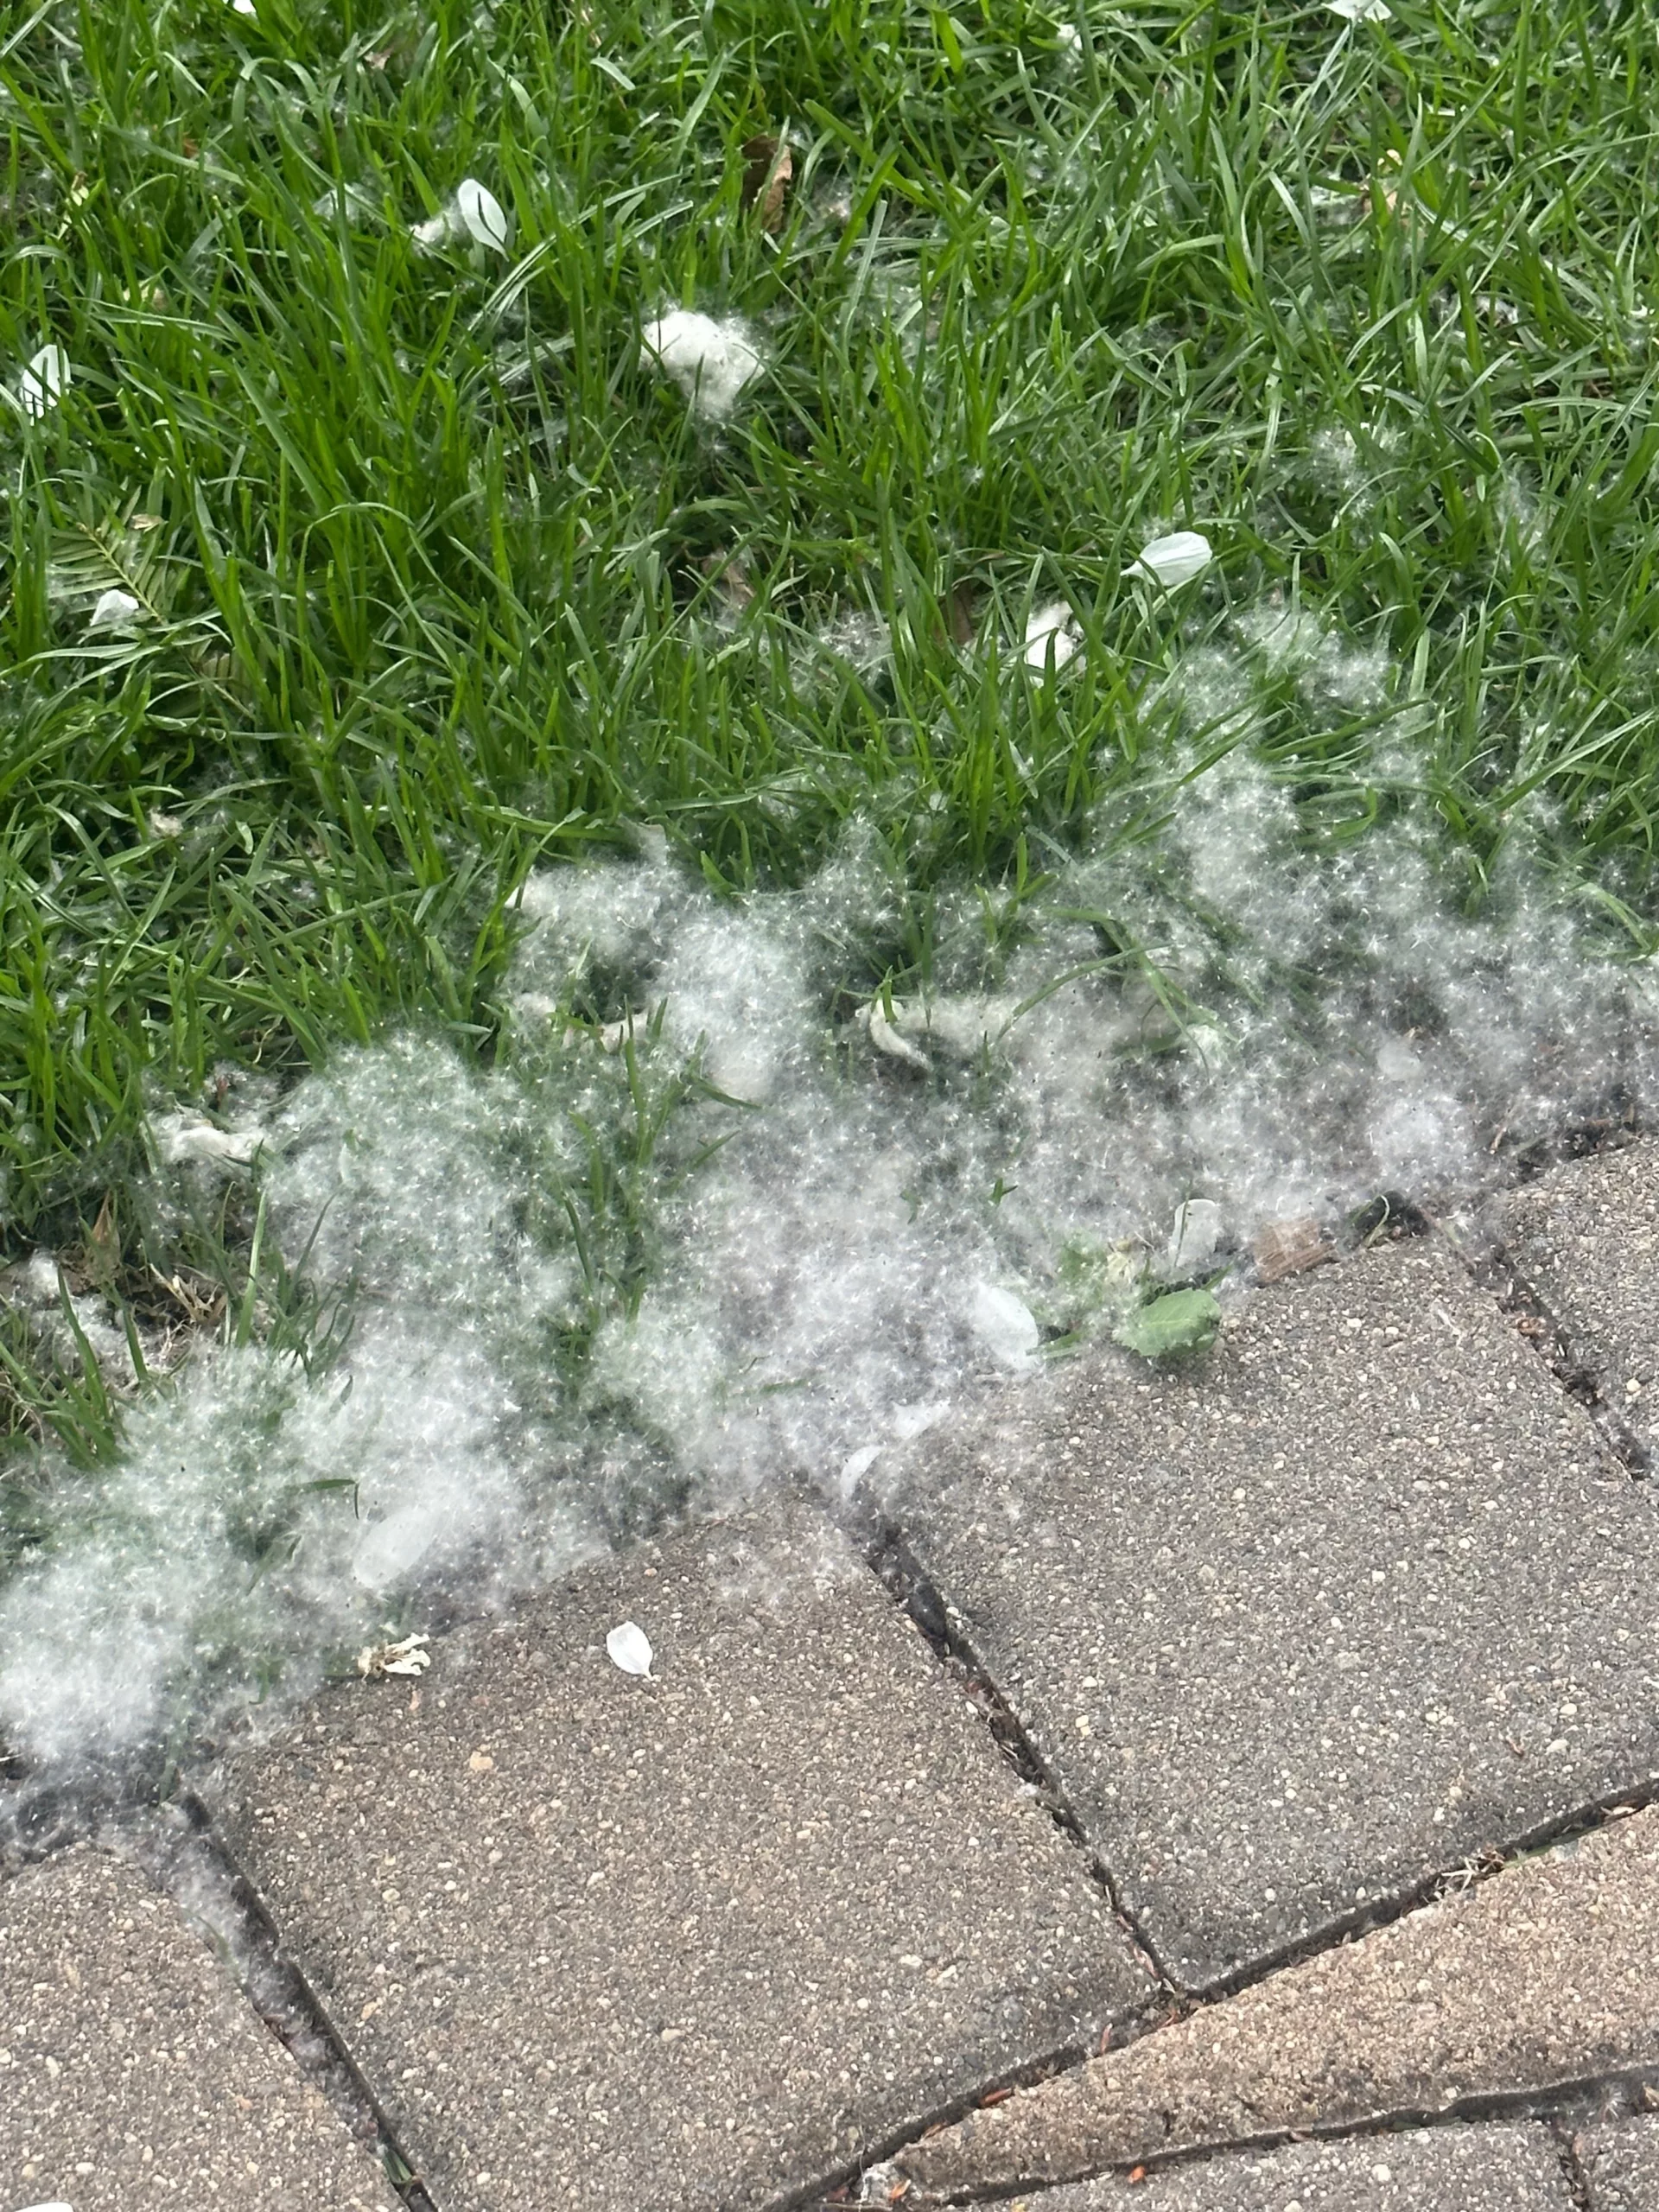 May’s Cottonwood Snow: A Blanket of Hope Amidst the Pain of Loss